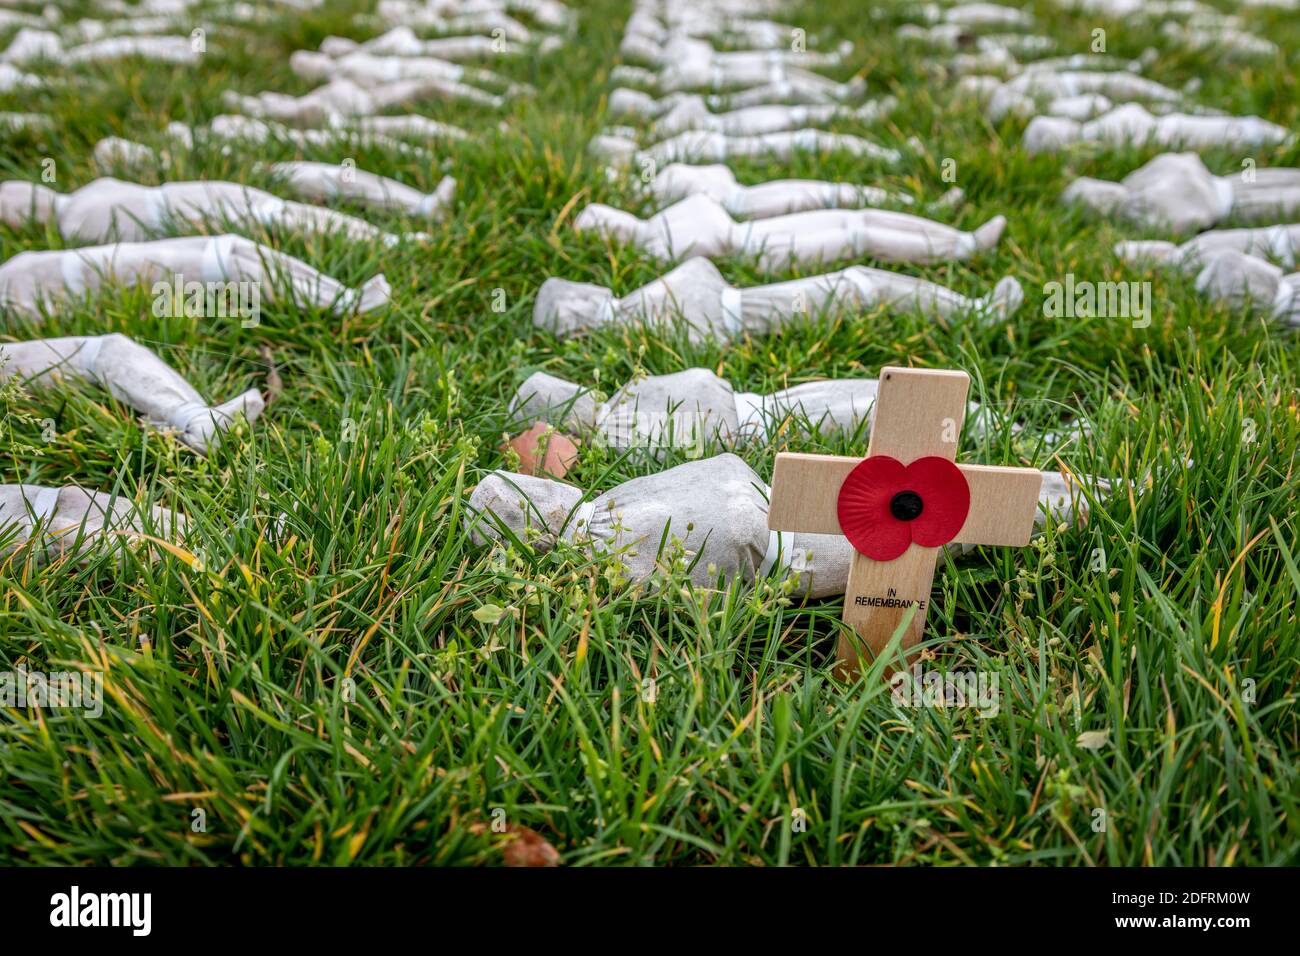 Shrouds of the Somme, Queen Elizabeth Olympic Park, London Stockfoto